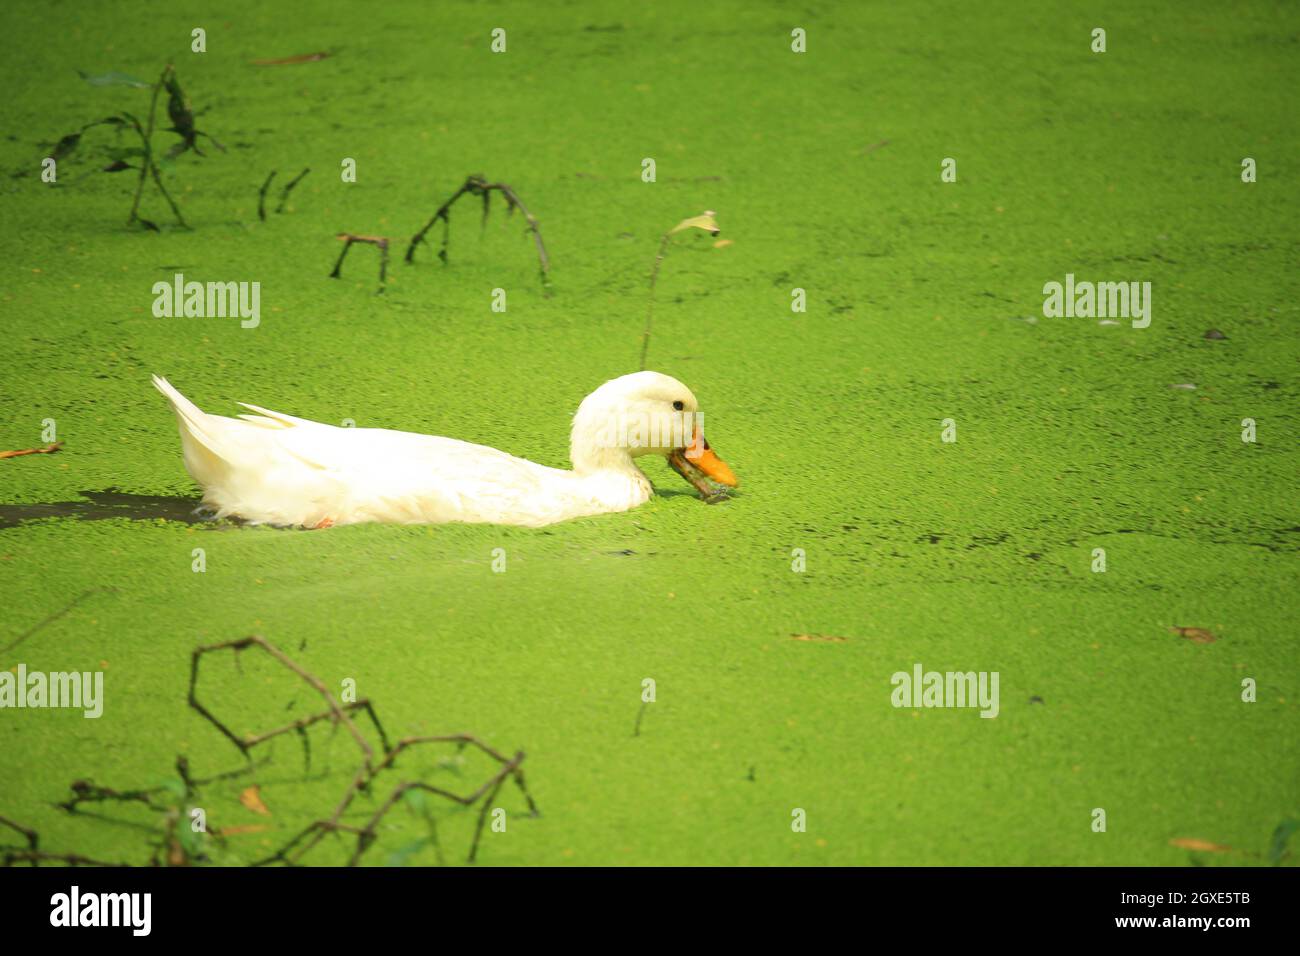 A duck has eaten algae floating in the water of a pond Stock Photo